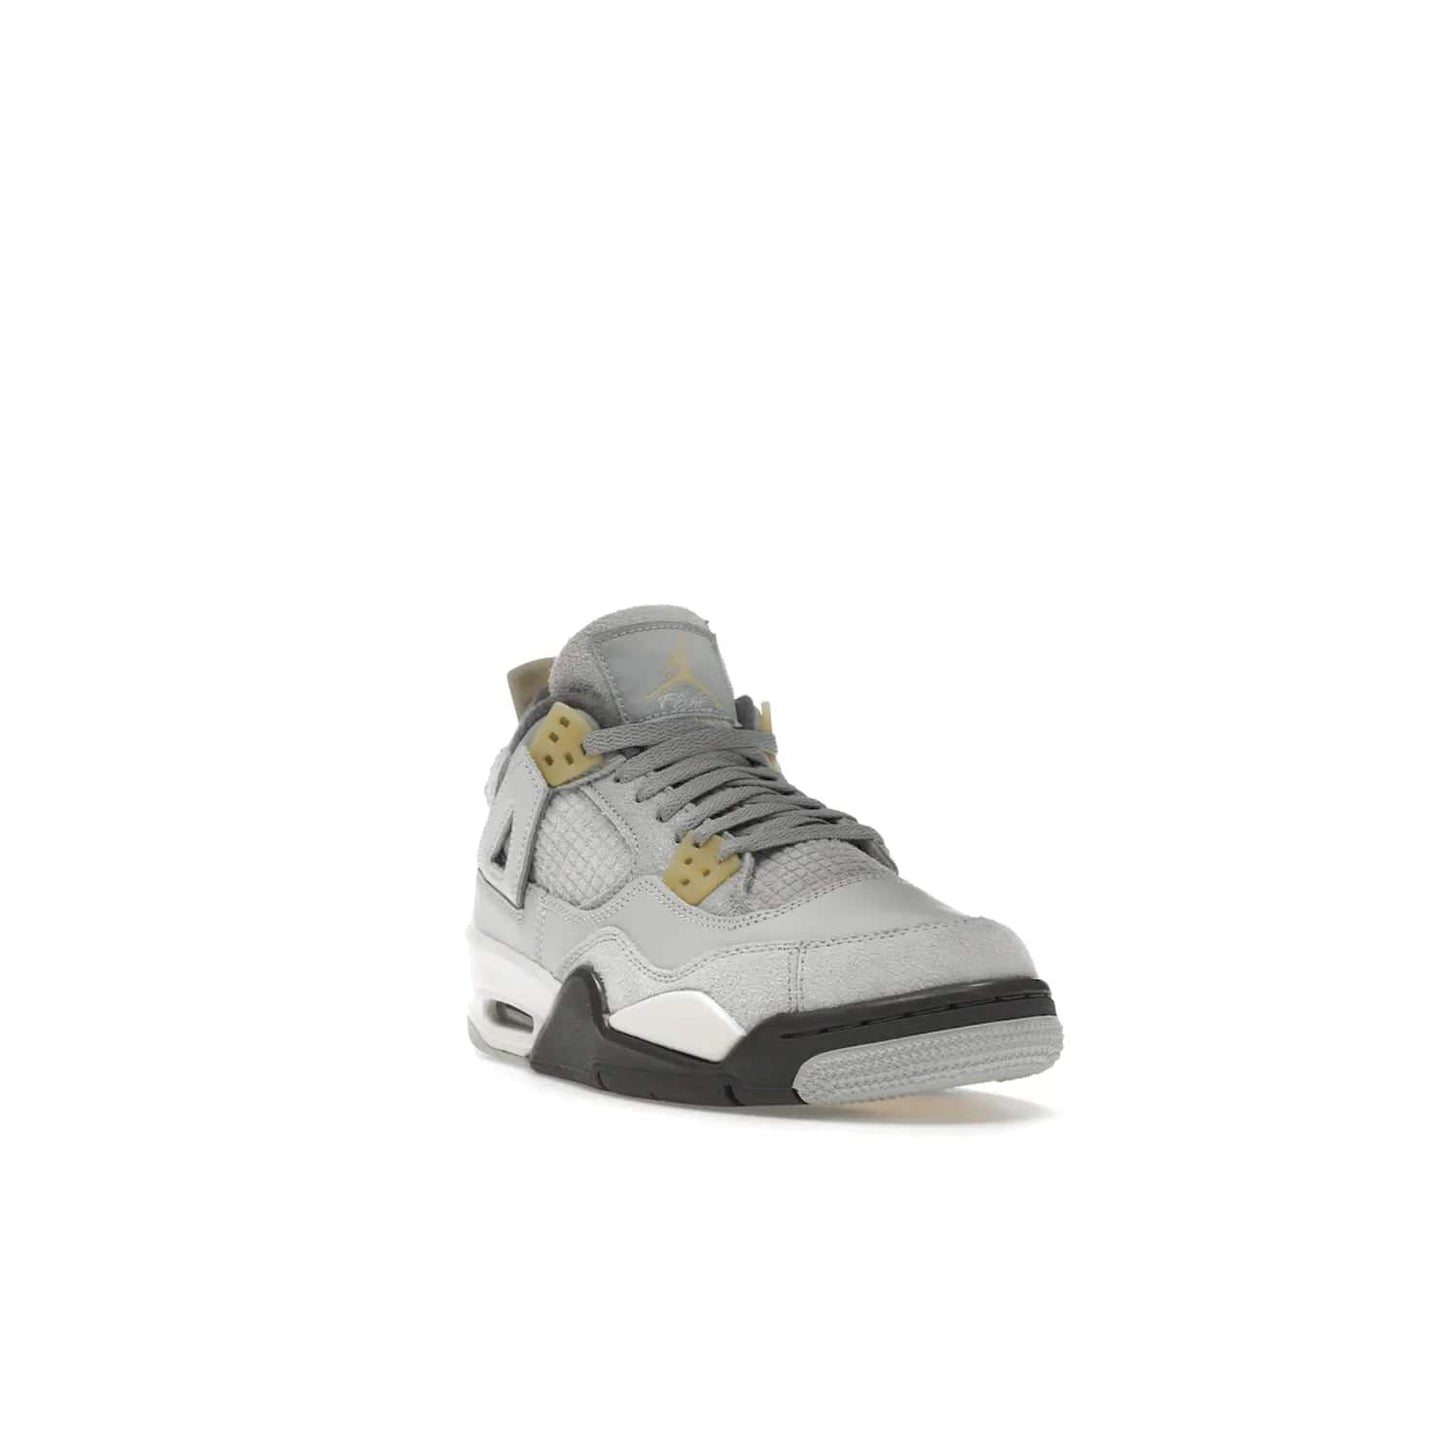 Jordan 4 Retro SE Craft Photon Dust (GS) - Image 7 - Only at www.BallersClubKickz.com - Shop the Jordan 4 Retro SE Craft Photon Dust (GS), the ultimate mix of style and comfort. With photonic dust, pale vanilla, off-white, grey fog, flat pewter and sail colorway, foam midsole, and rubber outsole, don't miss this special edition Jordan 4 releasing Feb 11, 2023.